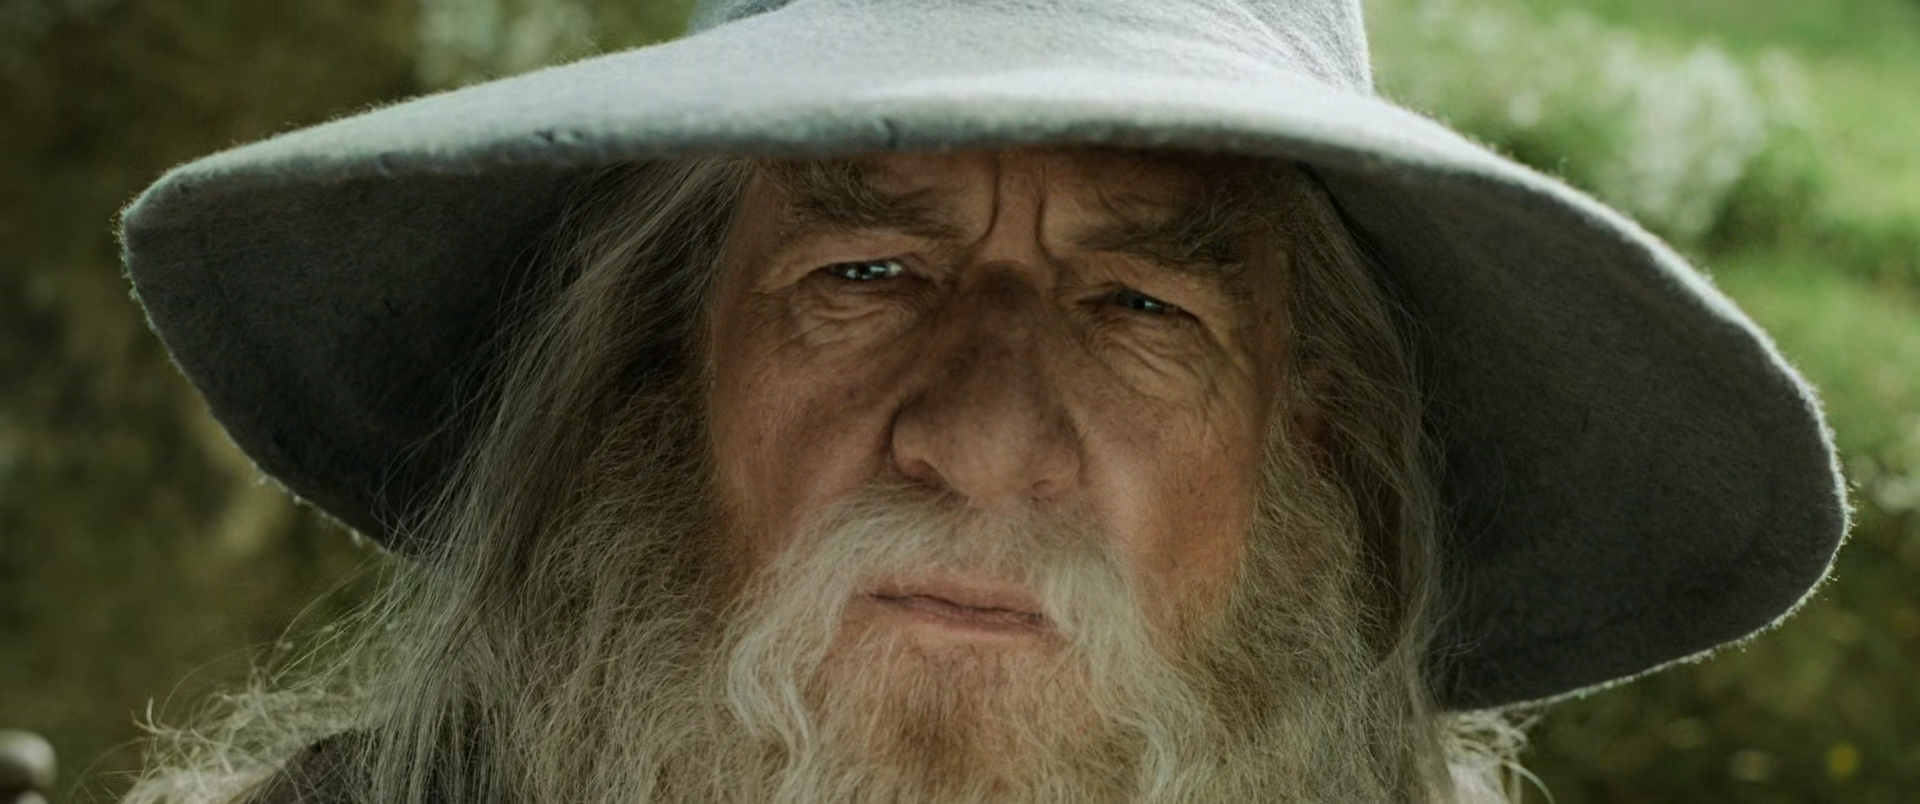 High Quality Gandalf: "A wizard is never late" Blank Meme Template